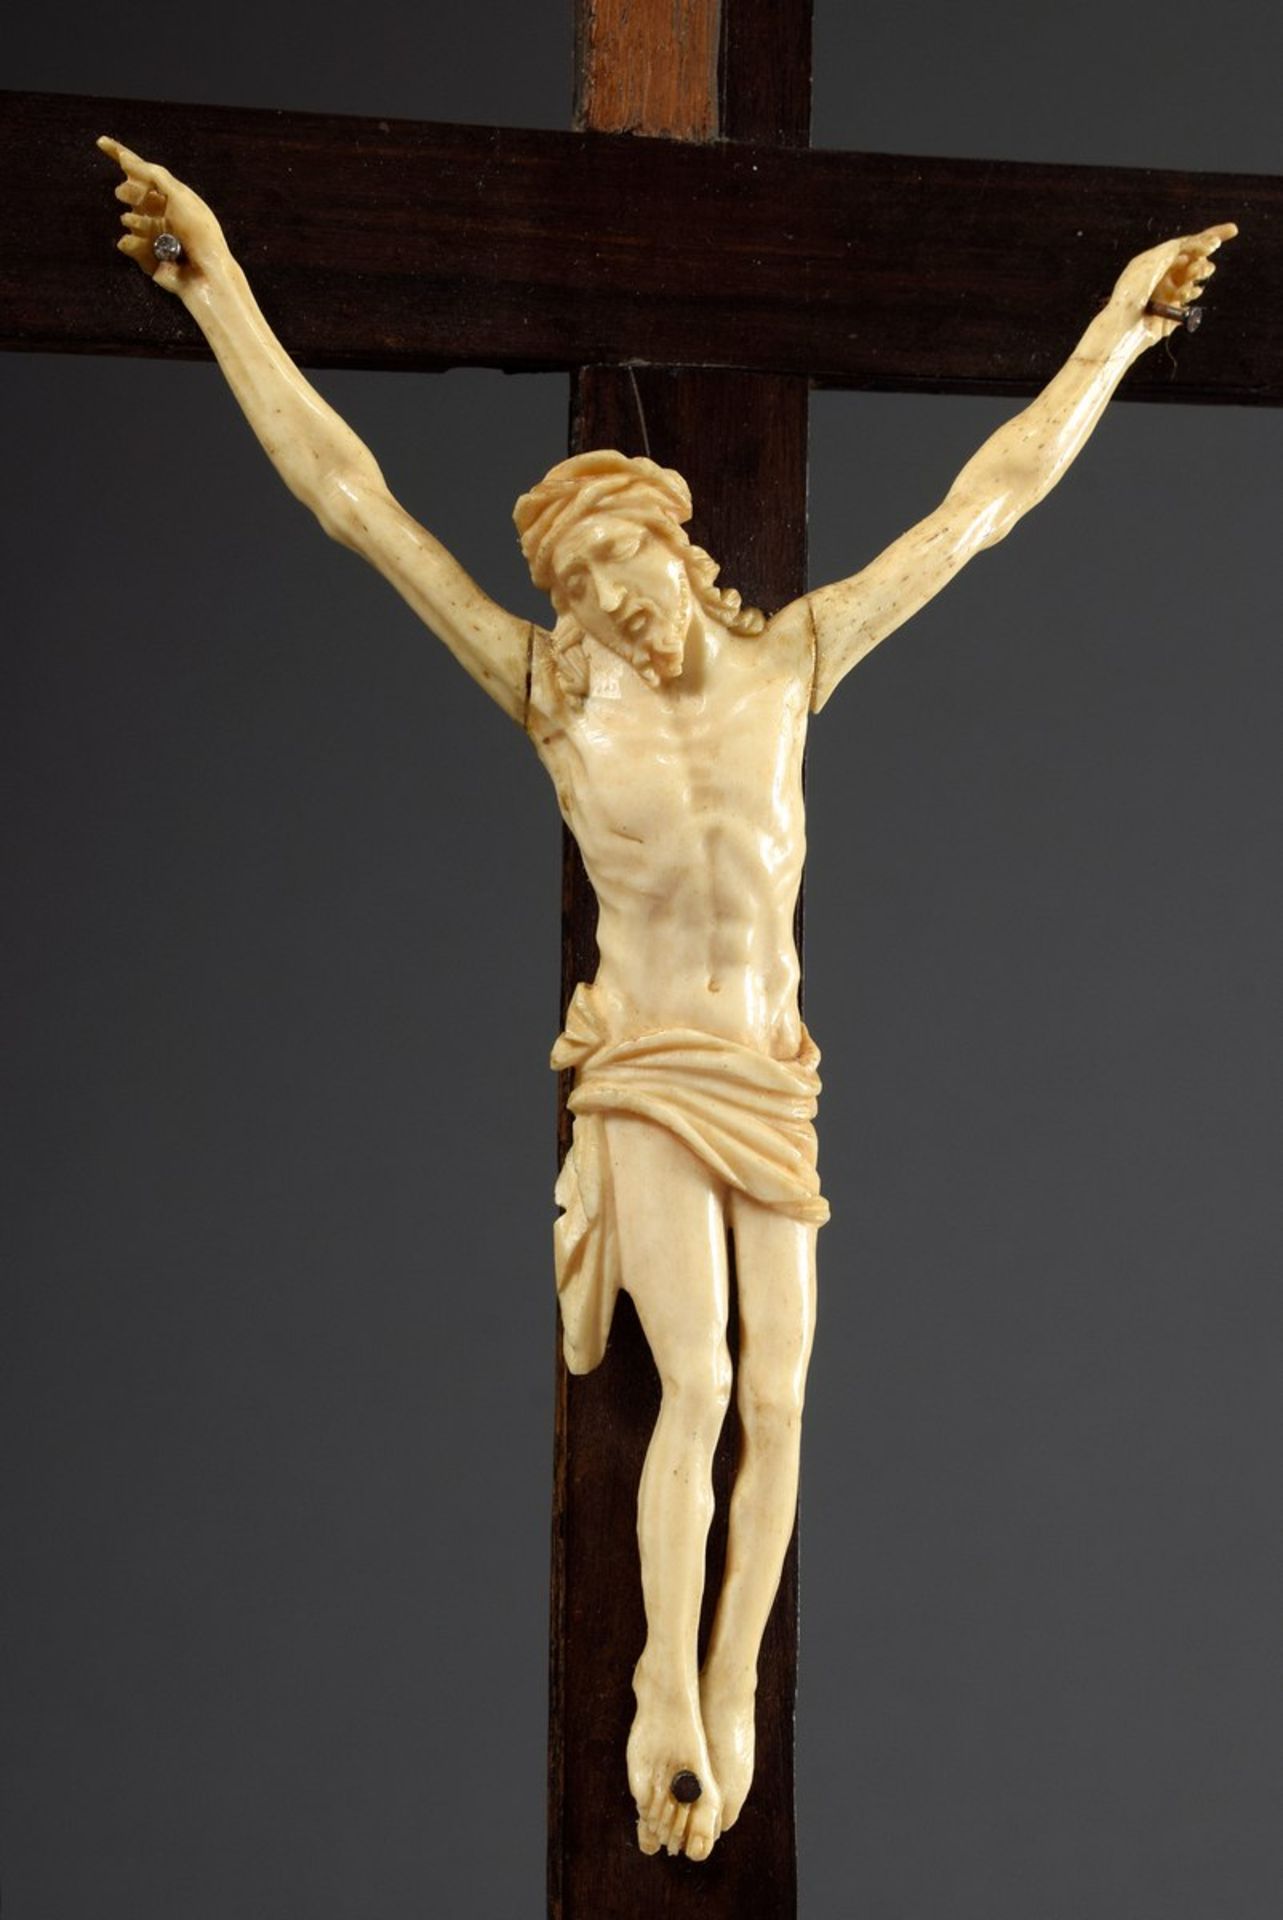 Ivory carving "Corpus Christi" (three-nail type) with the arms stretched far upwards and the head t